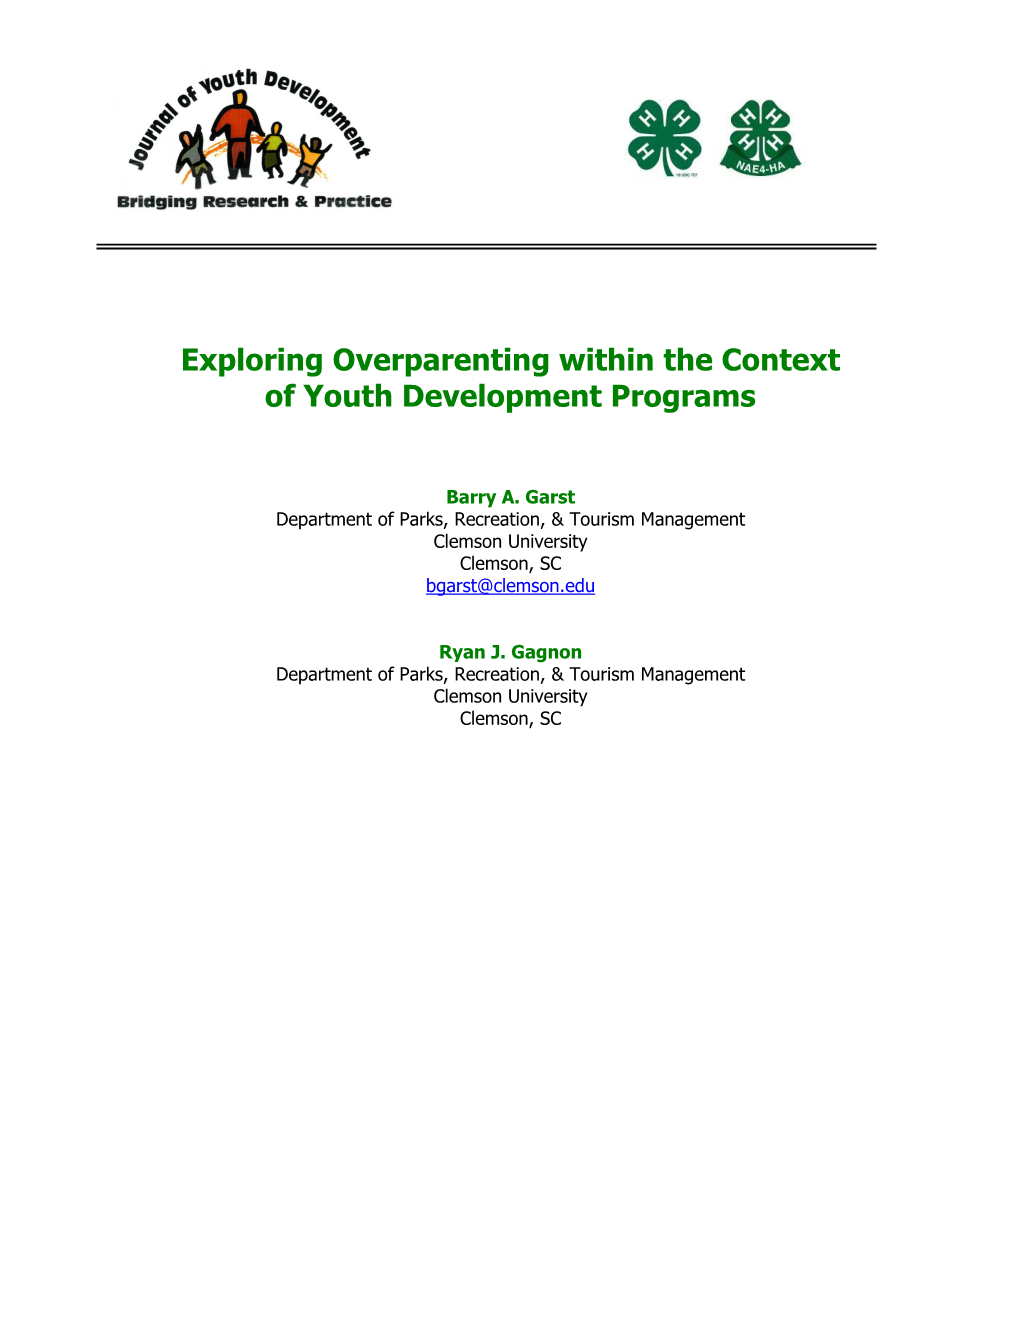 Exploring Overparenting Within the Context of Youth Development Programs